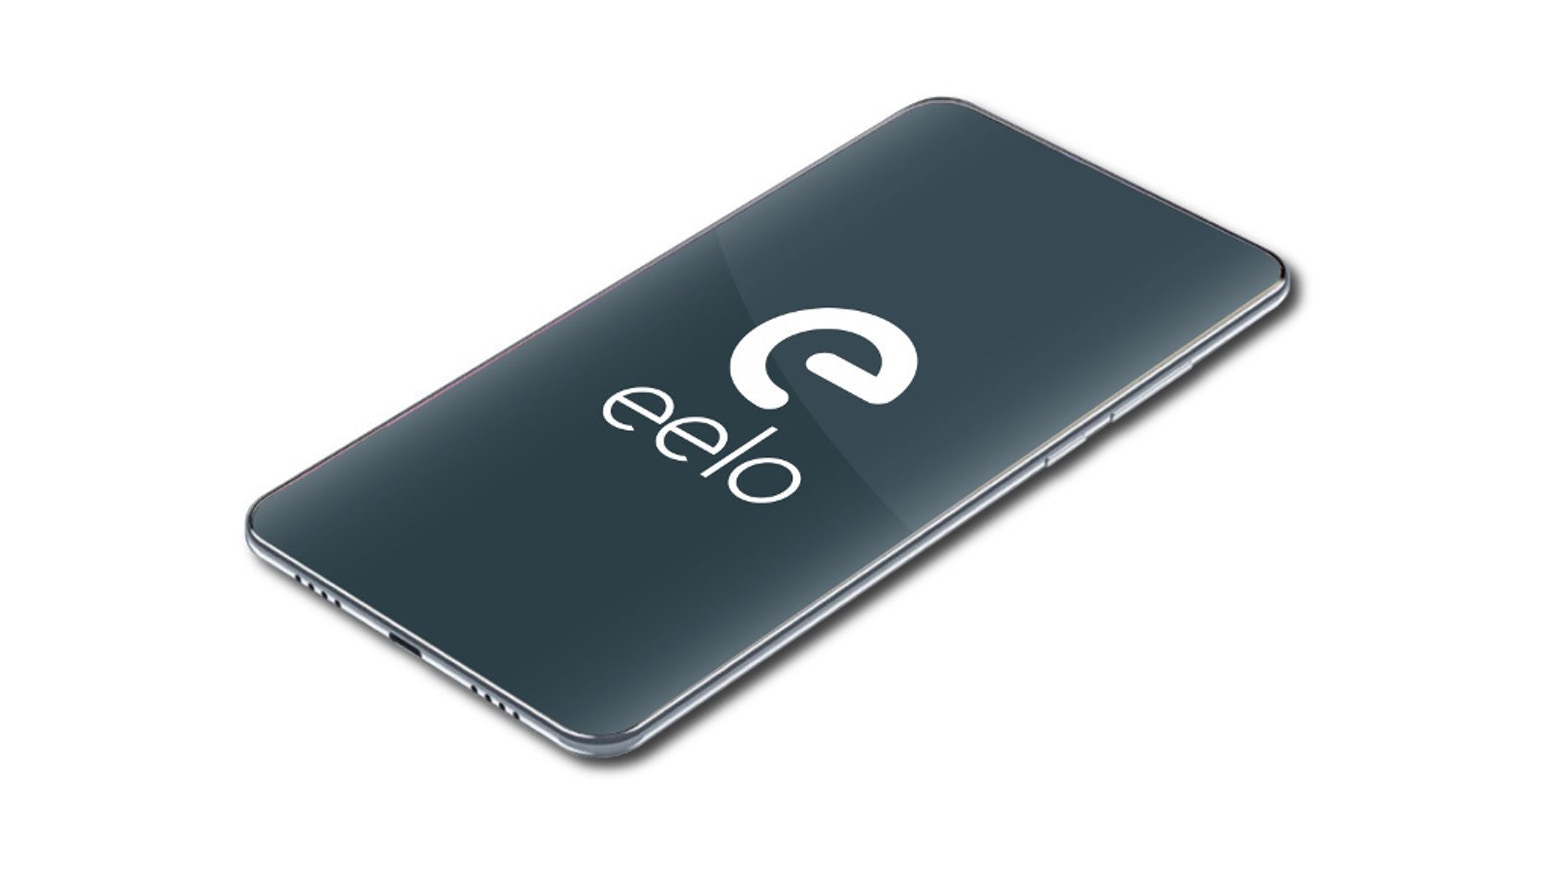 eelo, a mobile OS and web-services, in the public interest